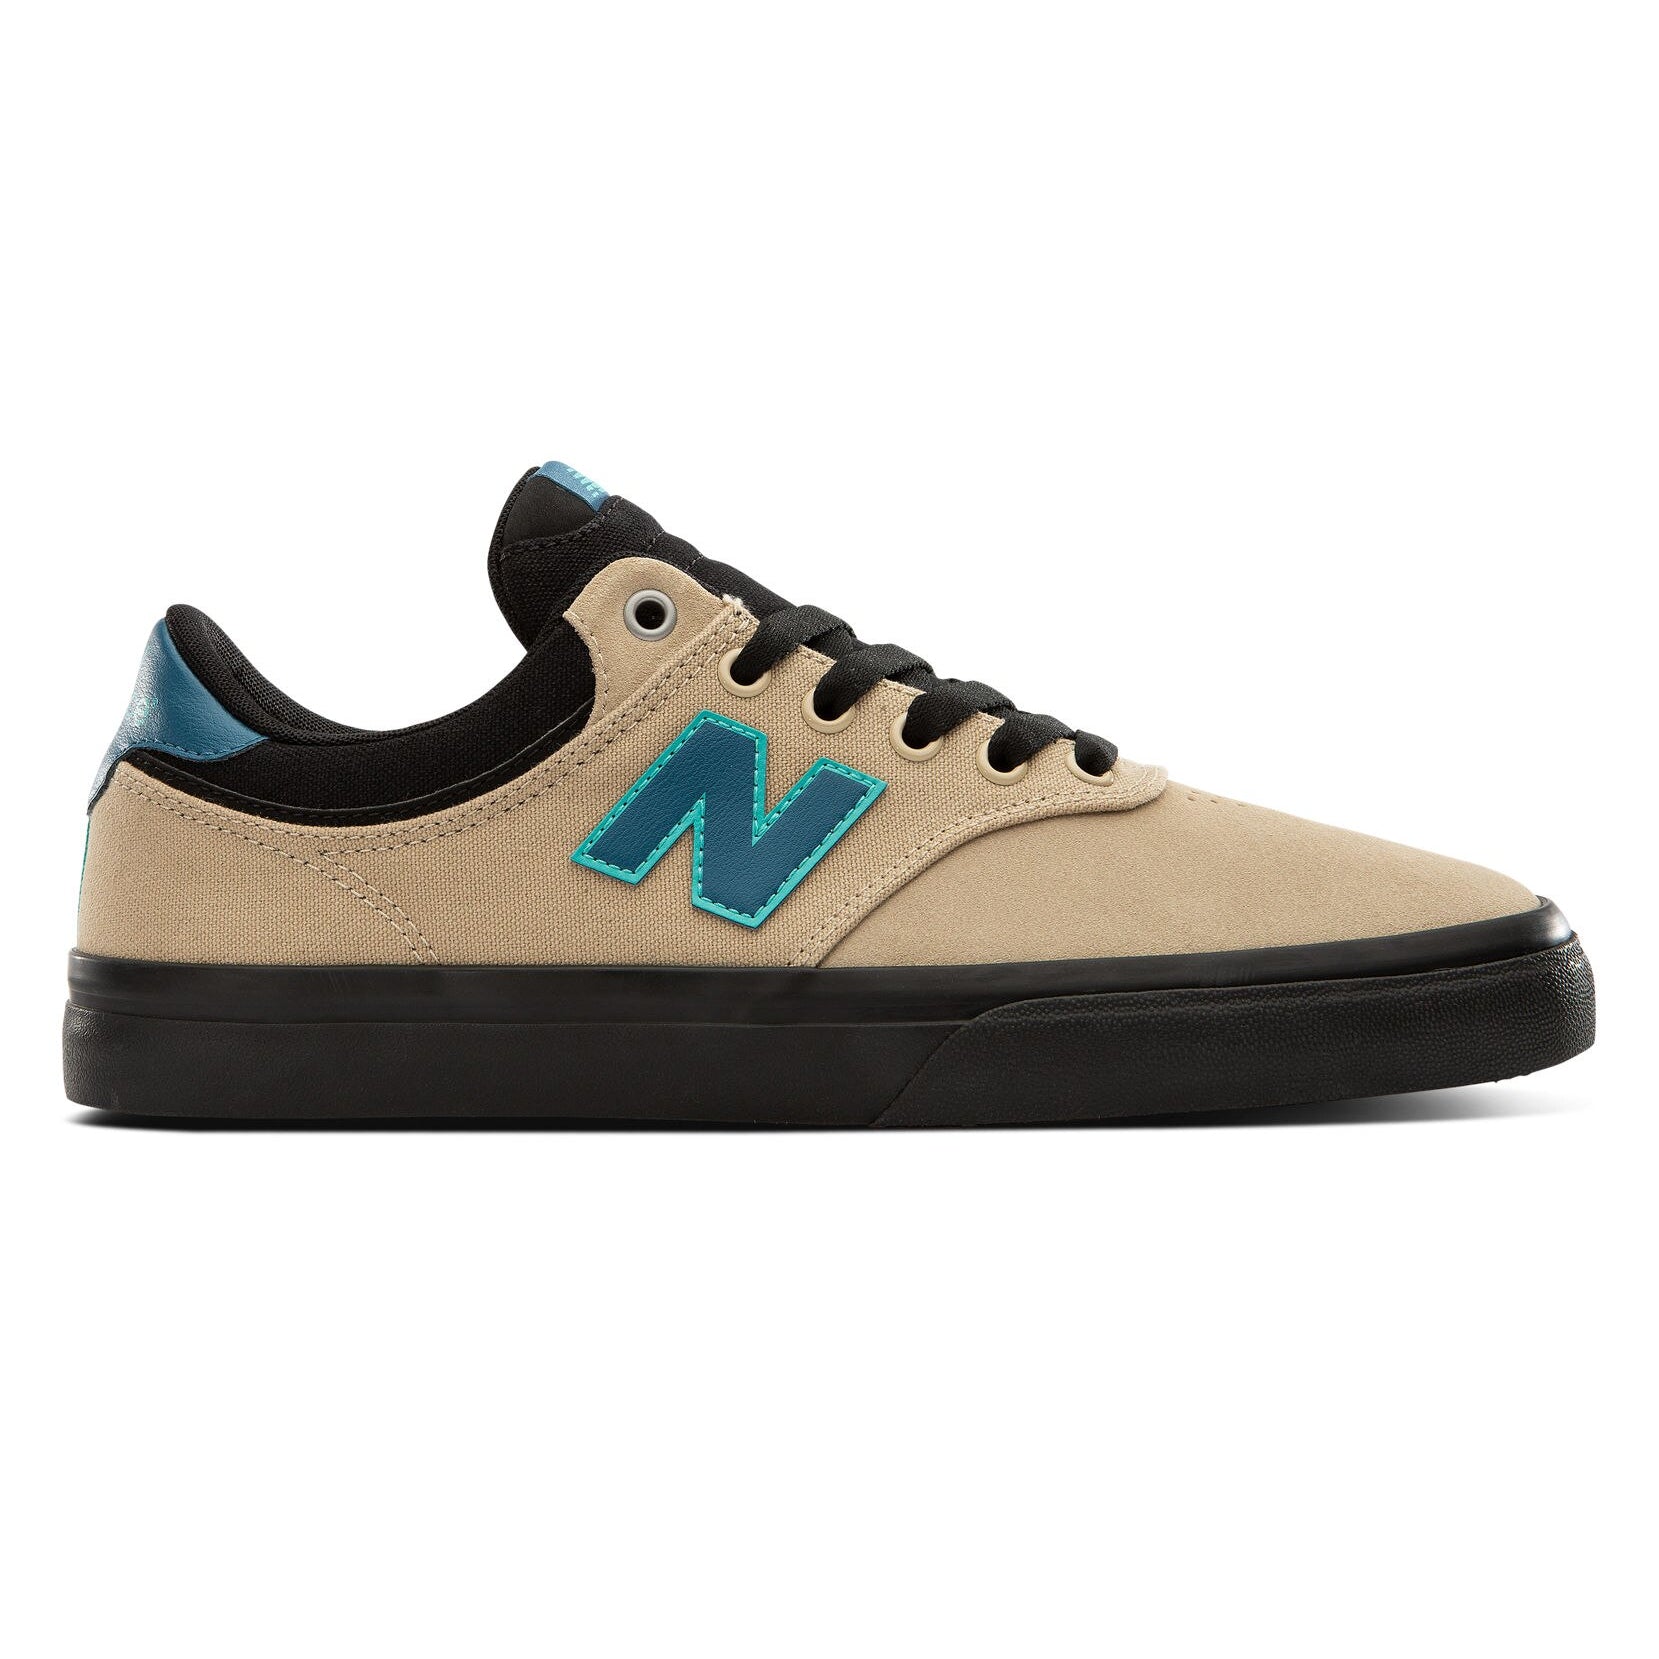 Tan and Blue NM255 New Balance Numeric Skateboarding Shoes